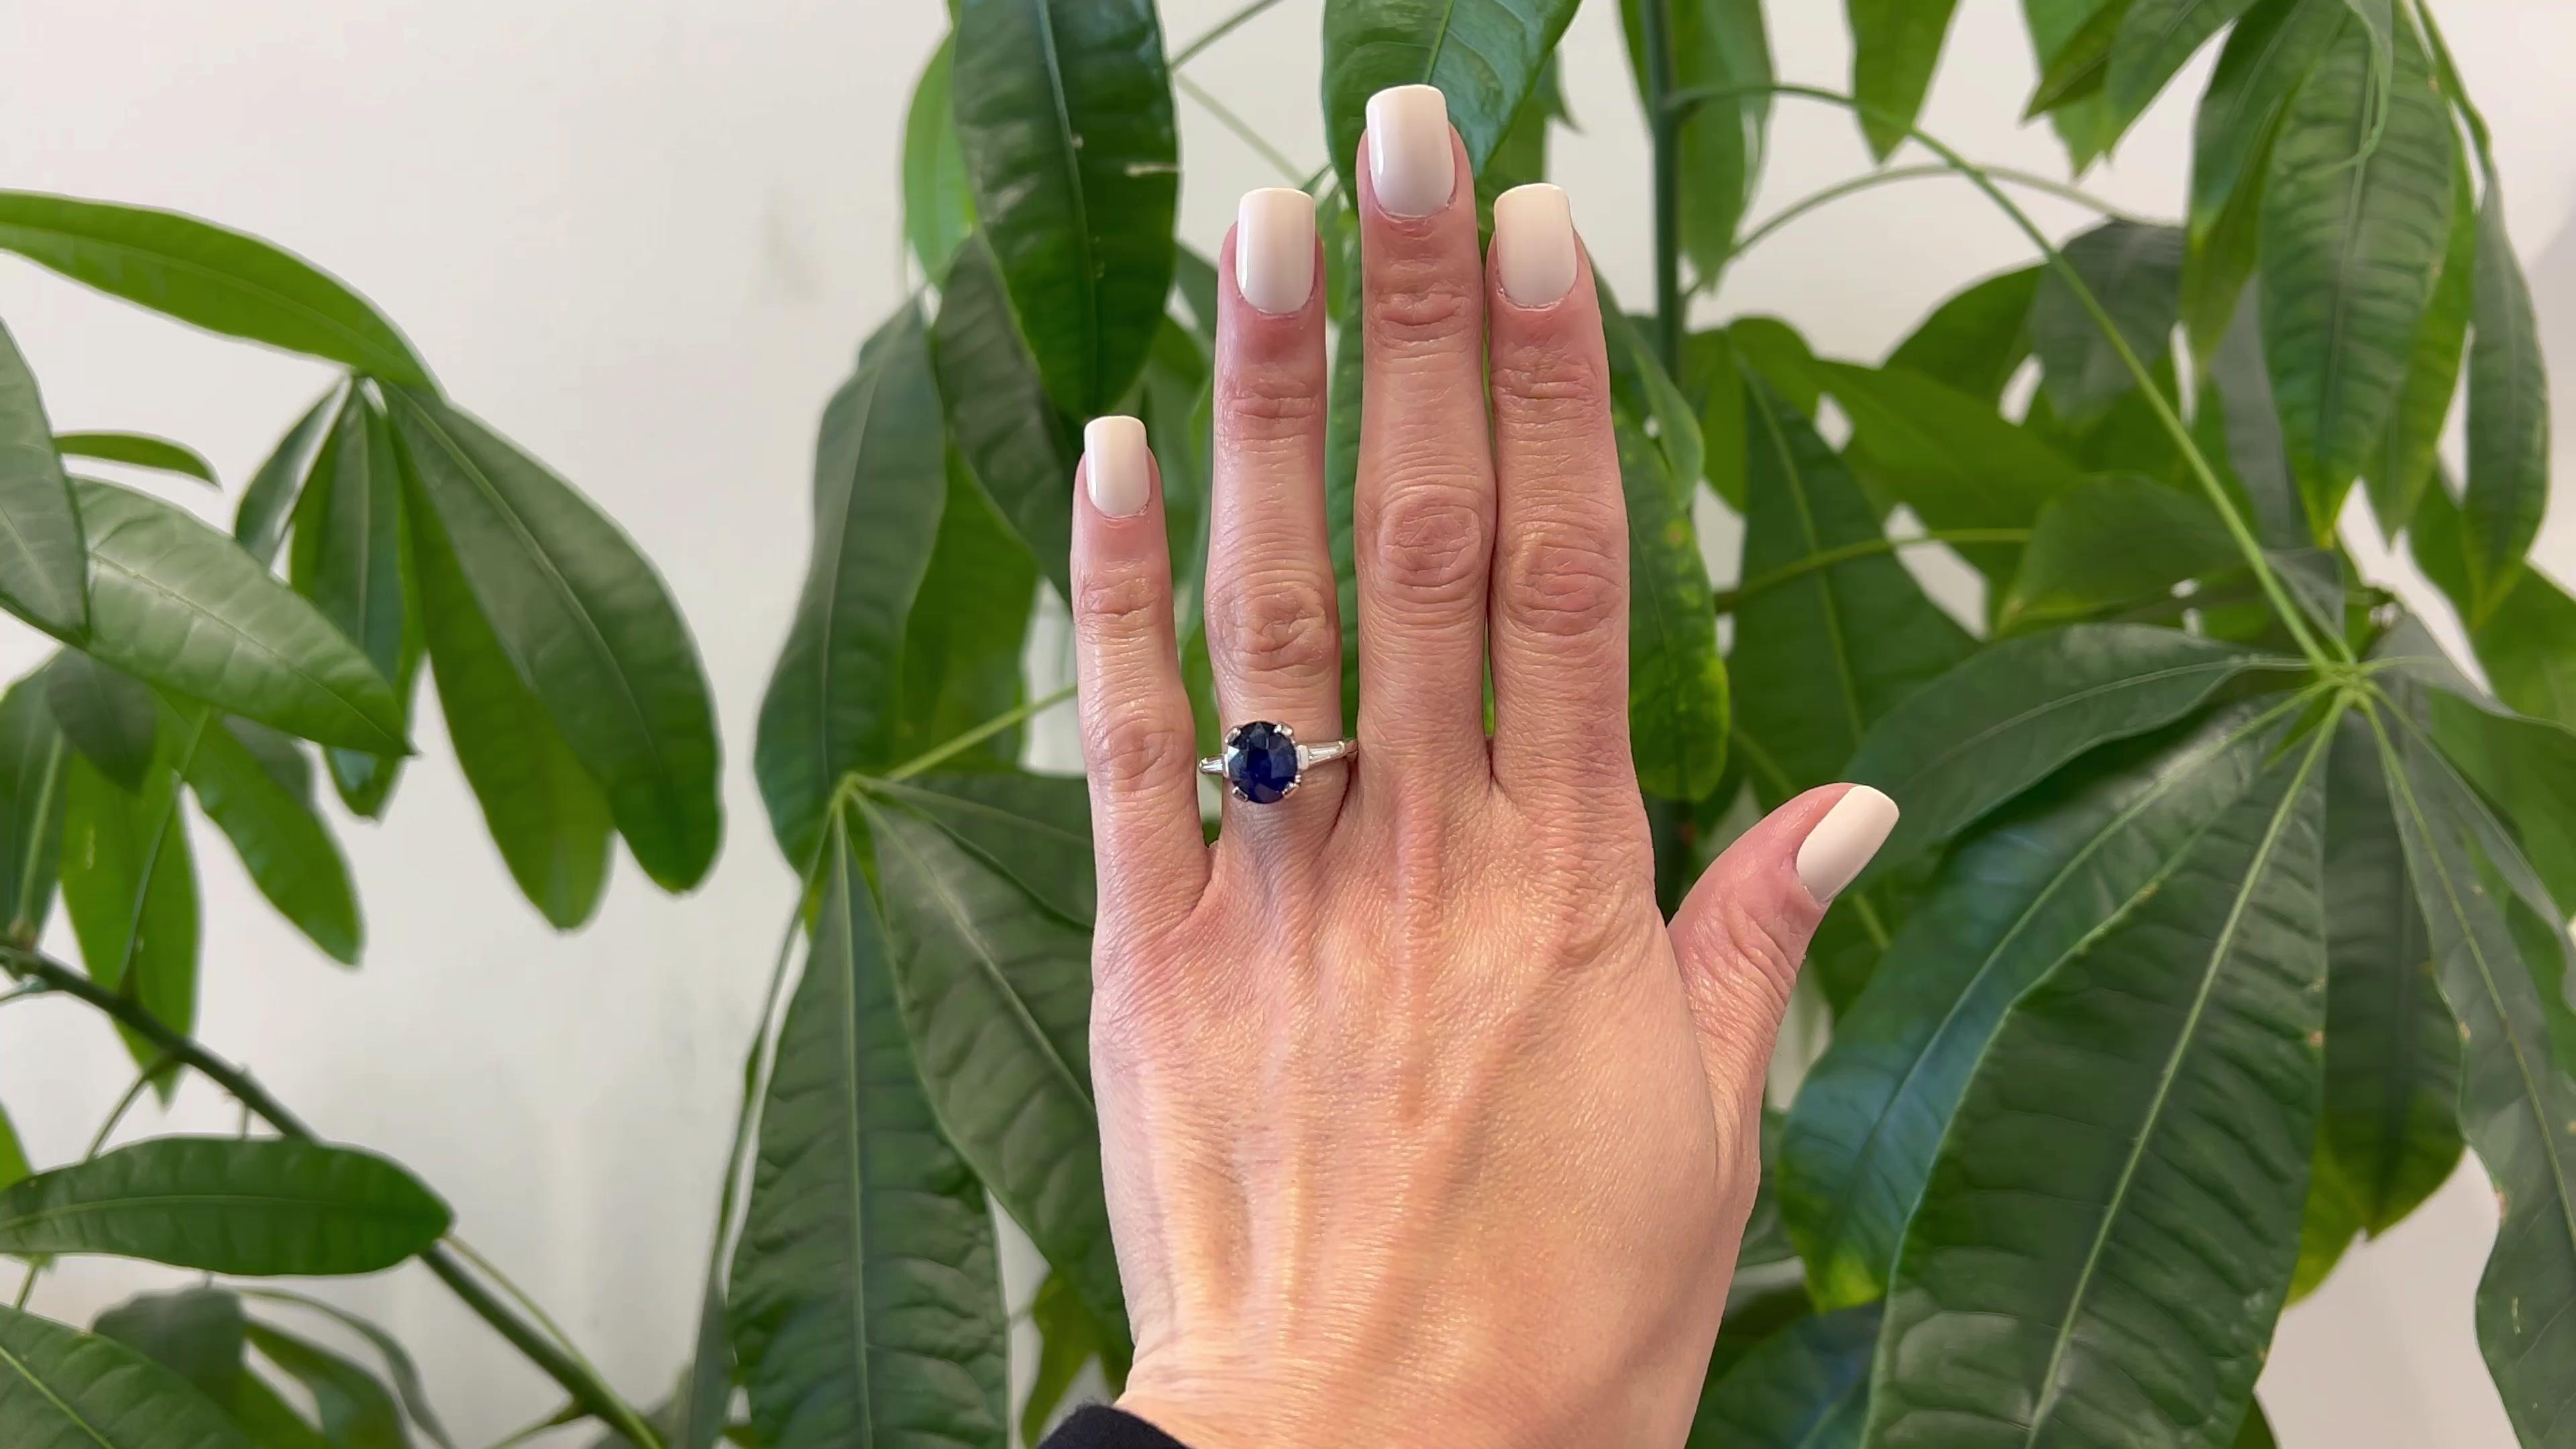 One Vintage GIA 5.54 Carat Ceylon Sapphire and Diamond Platinum Ring. Featuring one GIA oval mixed cut sapphire of 5.54 carats, accompanied with GIA #6224960119 stating the sapphire is of Ceylon (Sri Lanka) origin. Accented by two tapered baguette